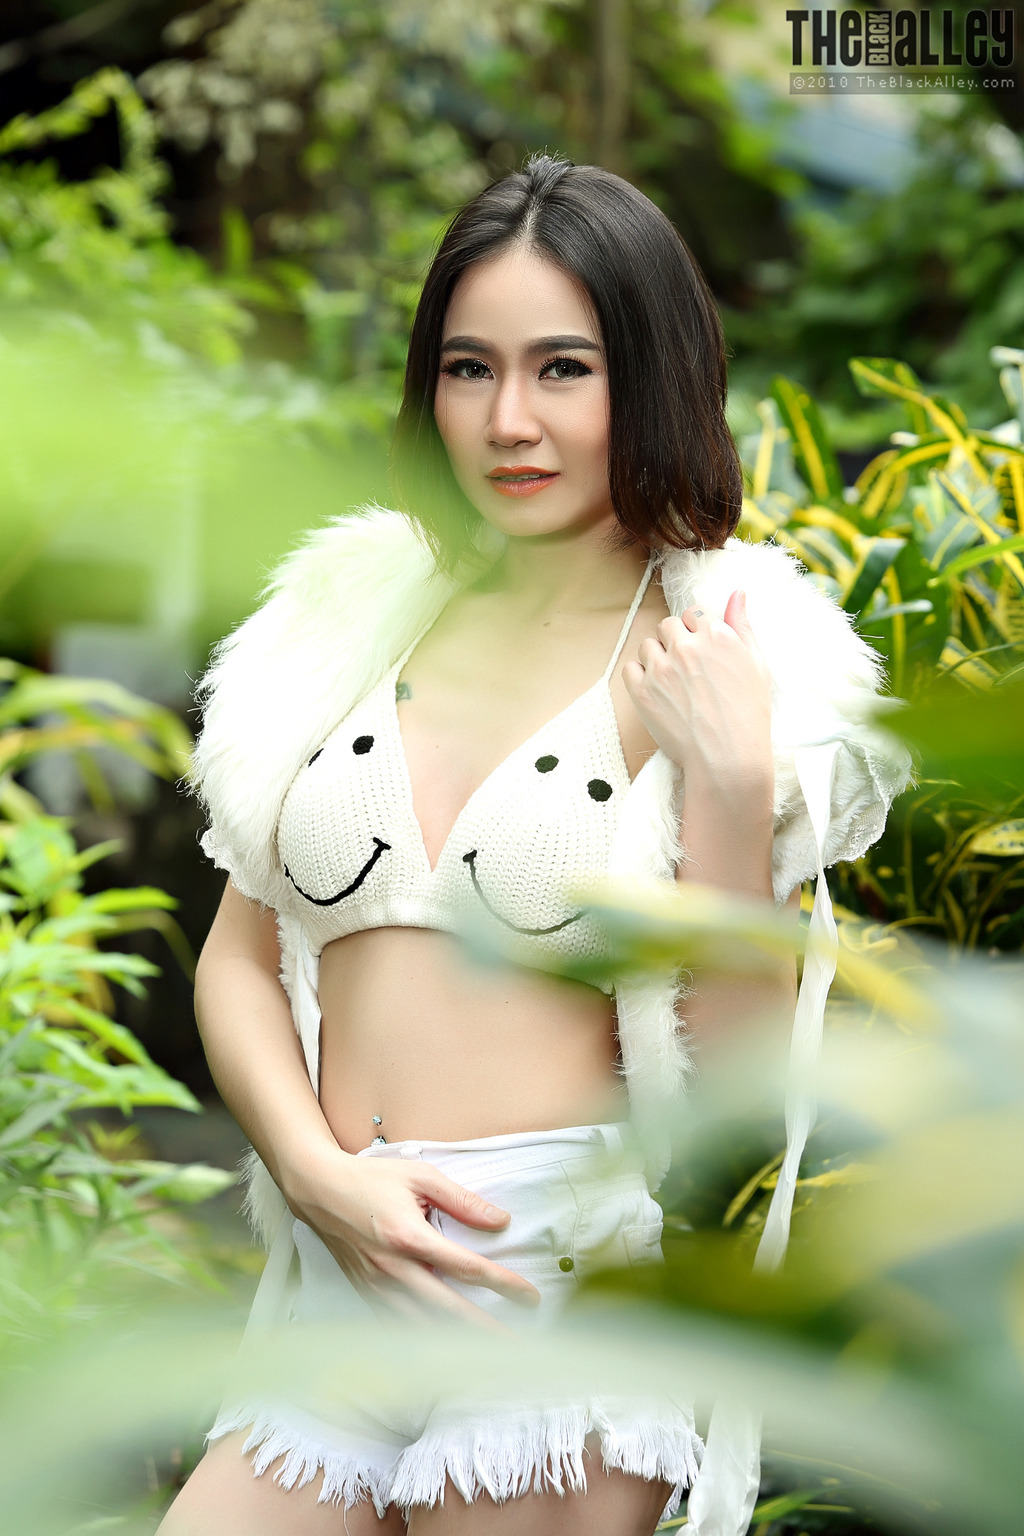 Busty Asian Strips Outdoors 00